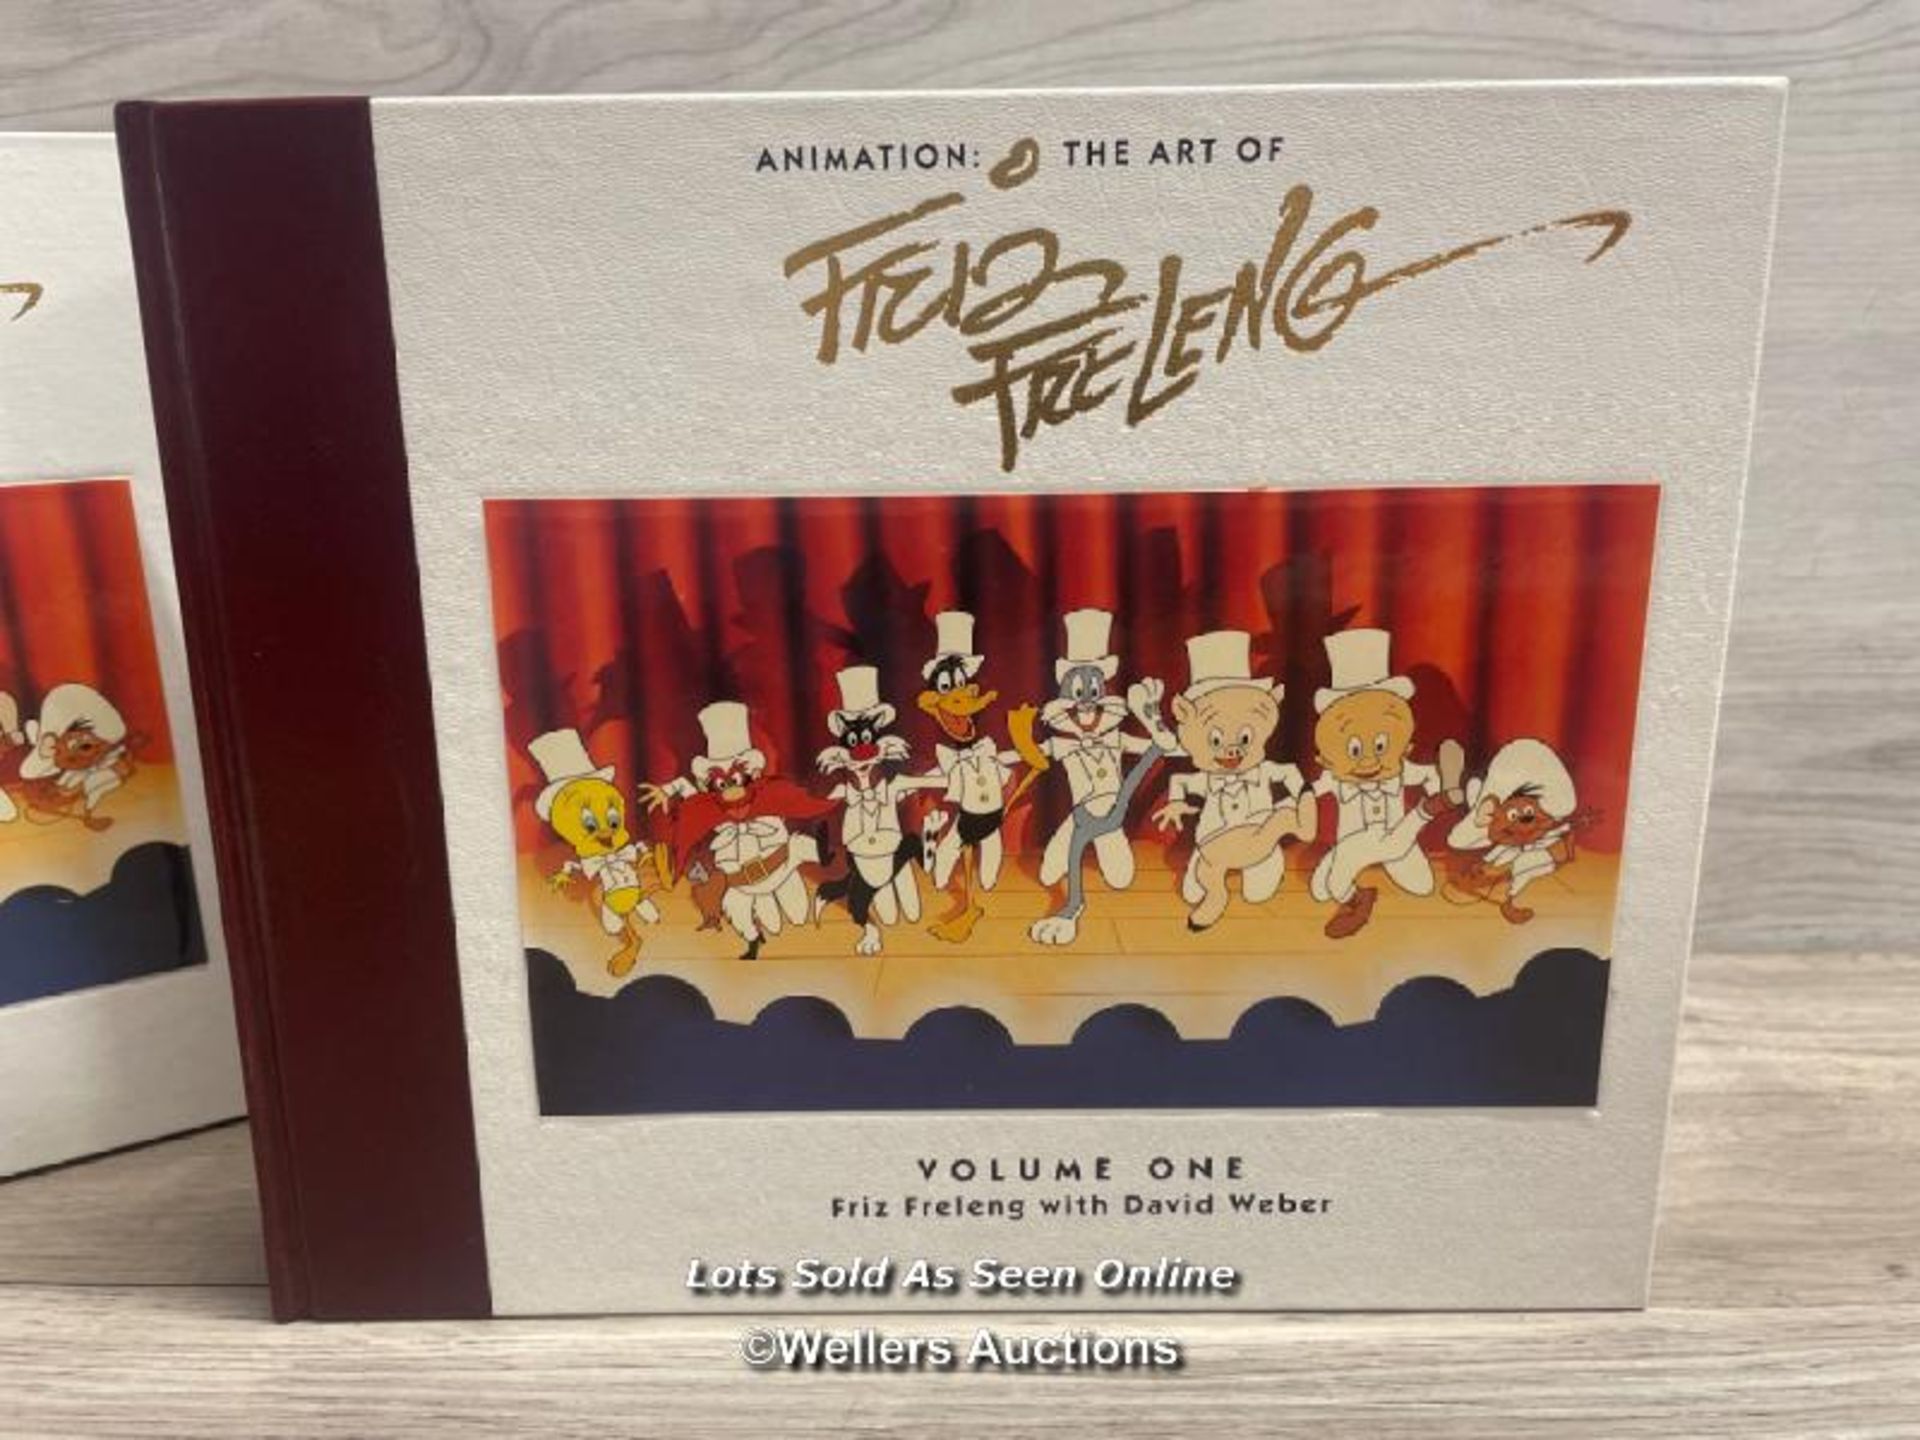 THE ANIMATION ART OF FRITZ FRELENG VOLUME ONE, LIMITED EDITION BOOK NO. 3697 / 4000, SIGNED